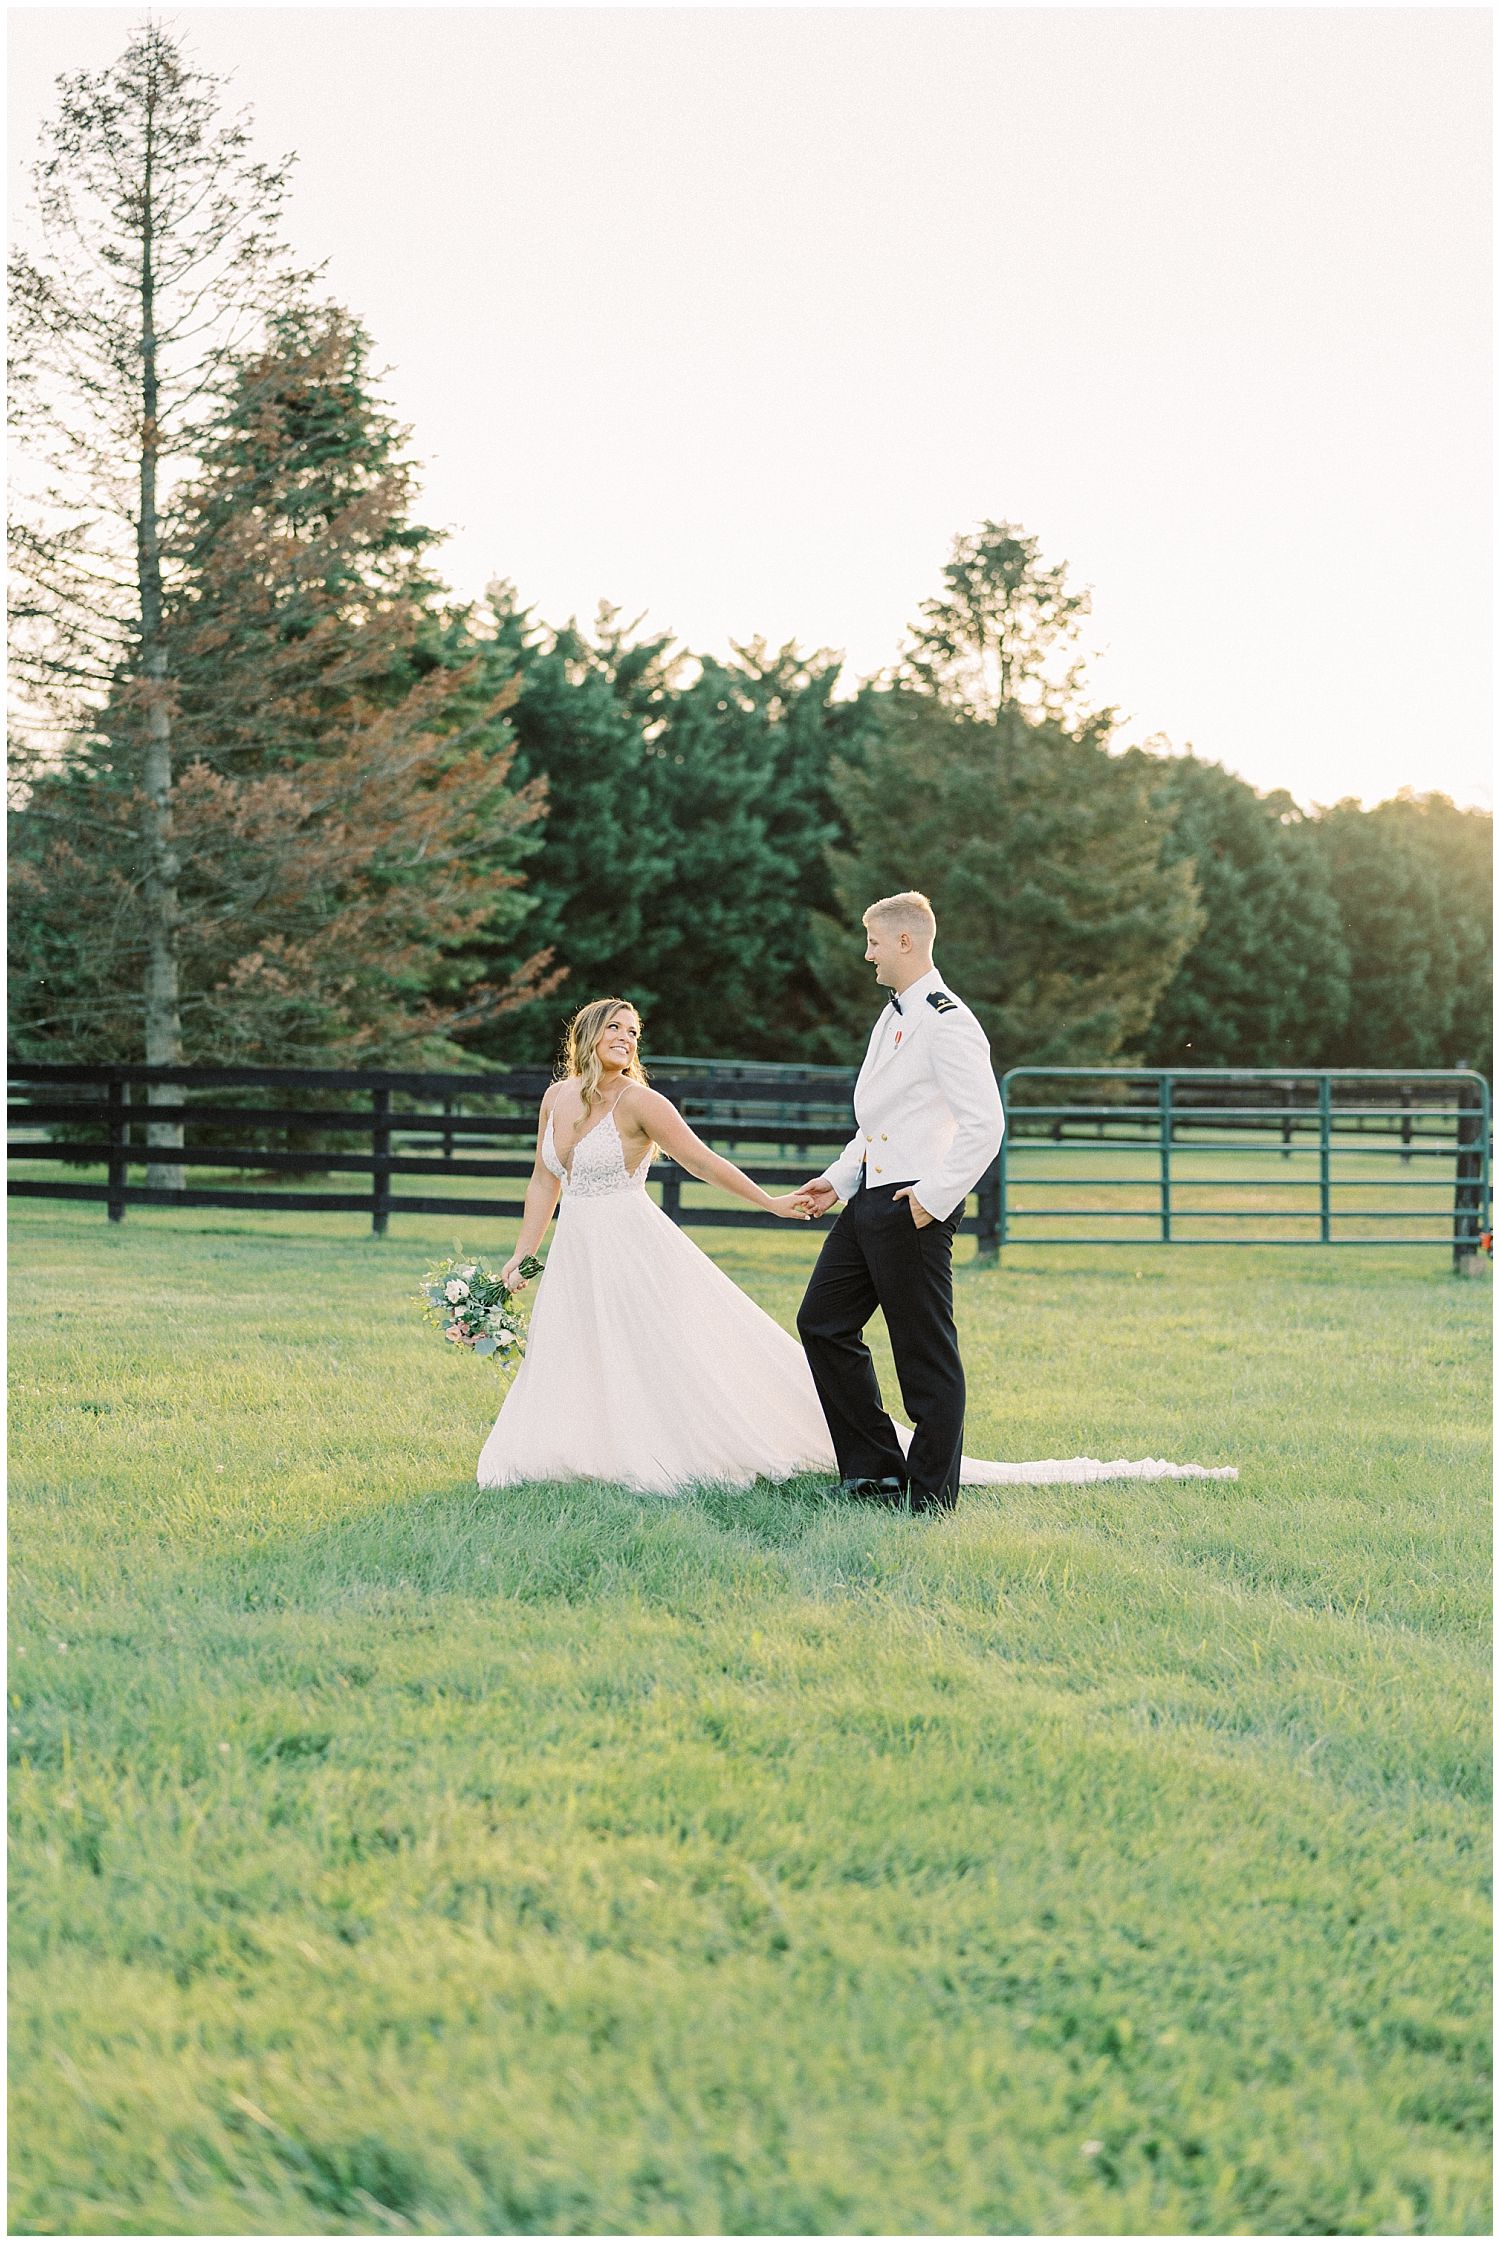 Bride and groom portraits at 8 Chains North Winery